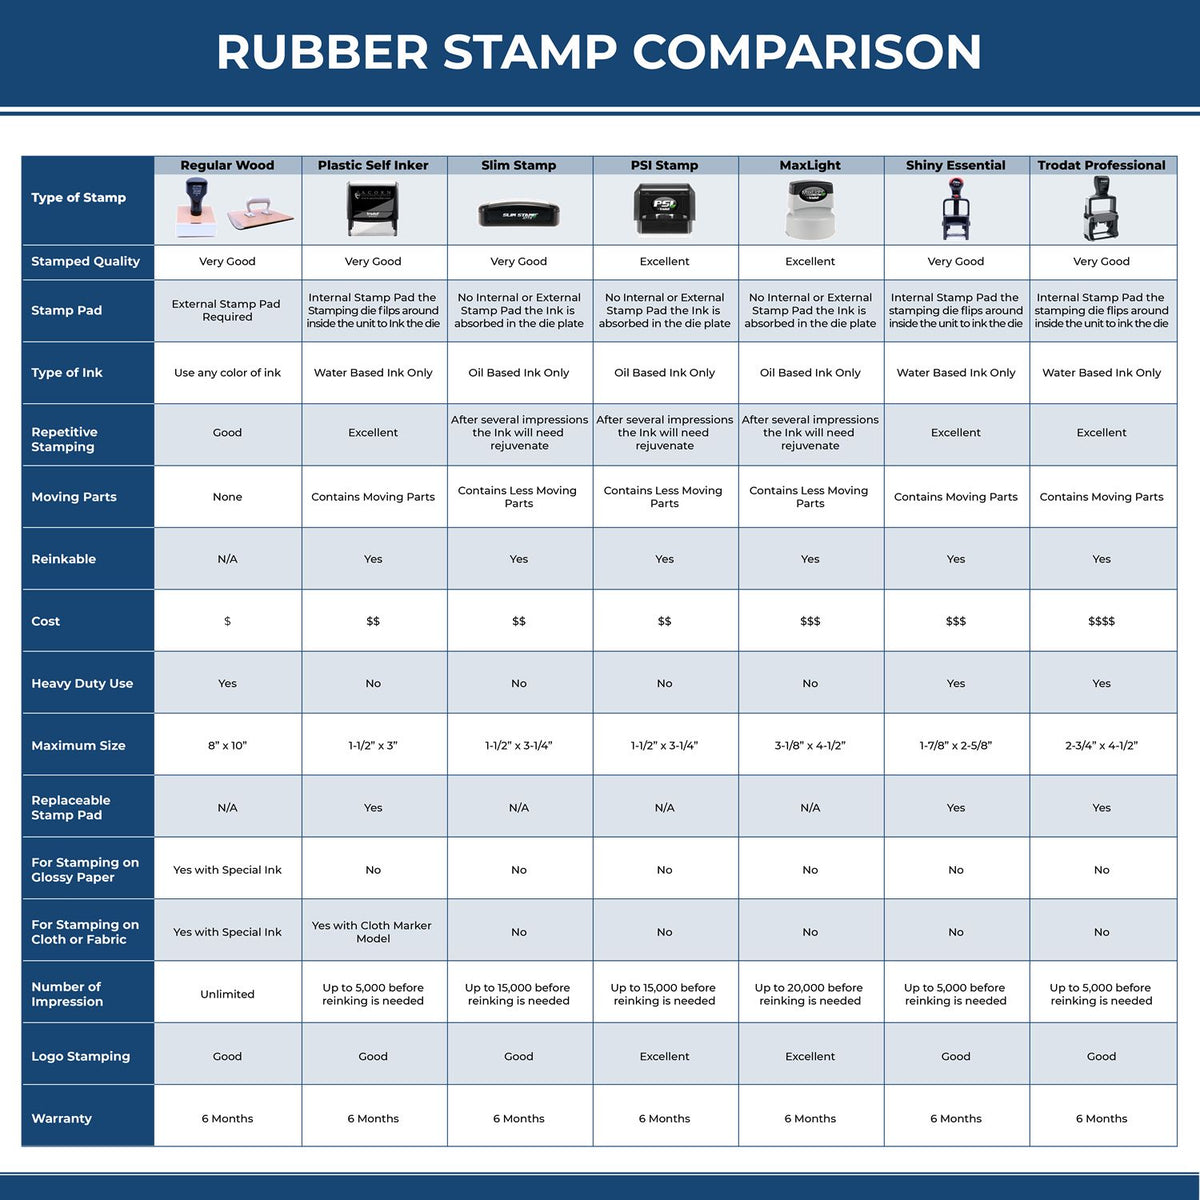 Please Pay Now No Statements Rubber Stamp 4463R Rubber Stamp Comparison